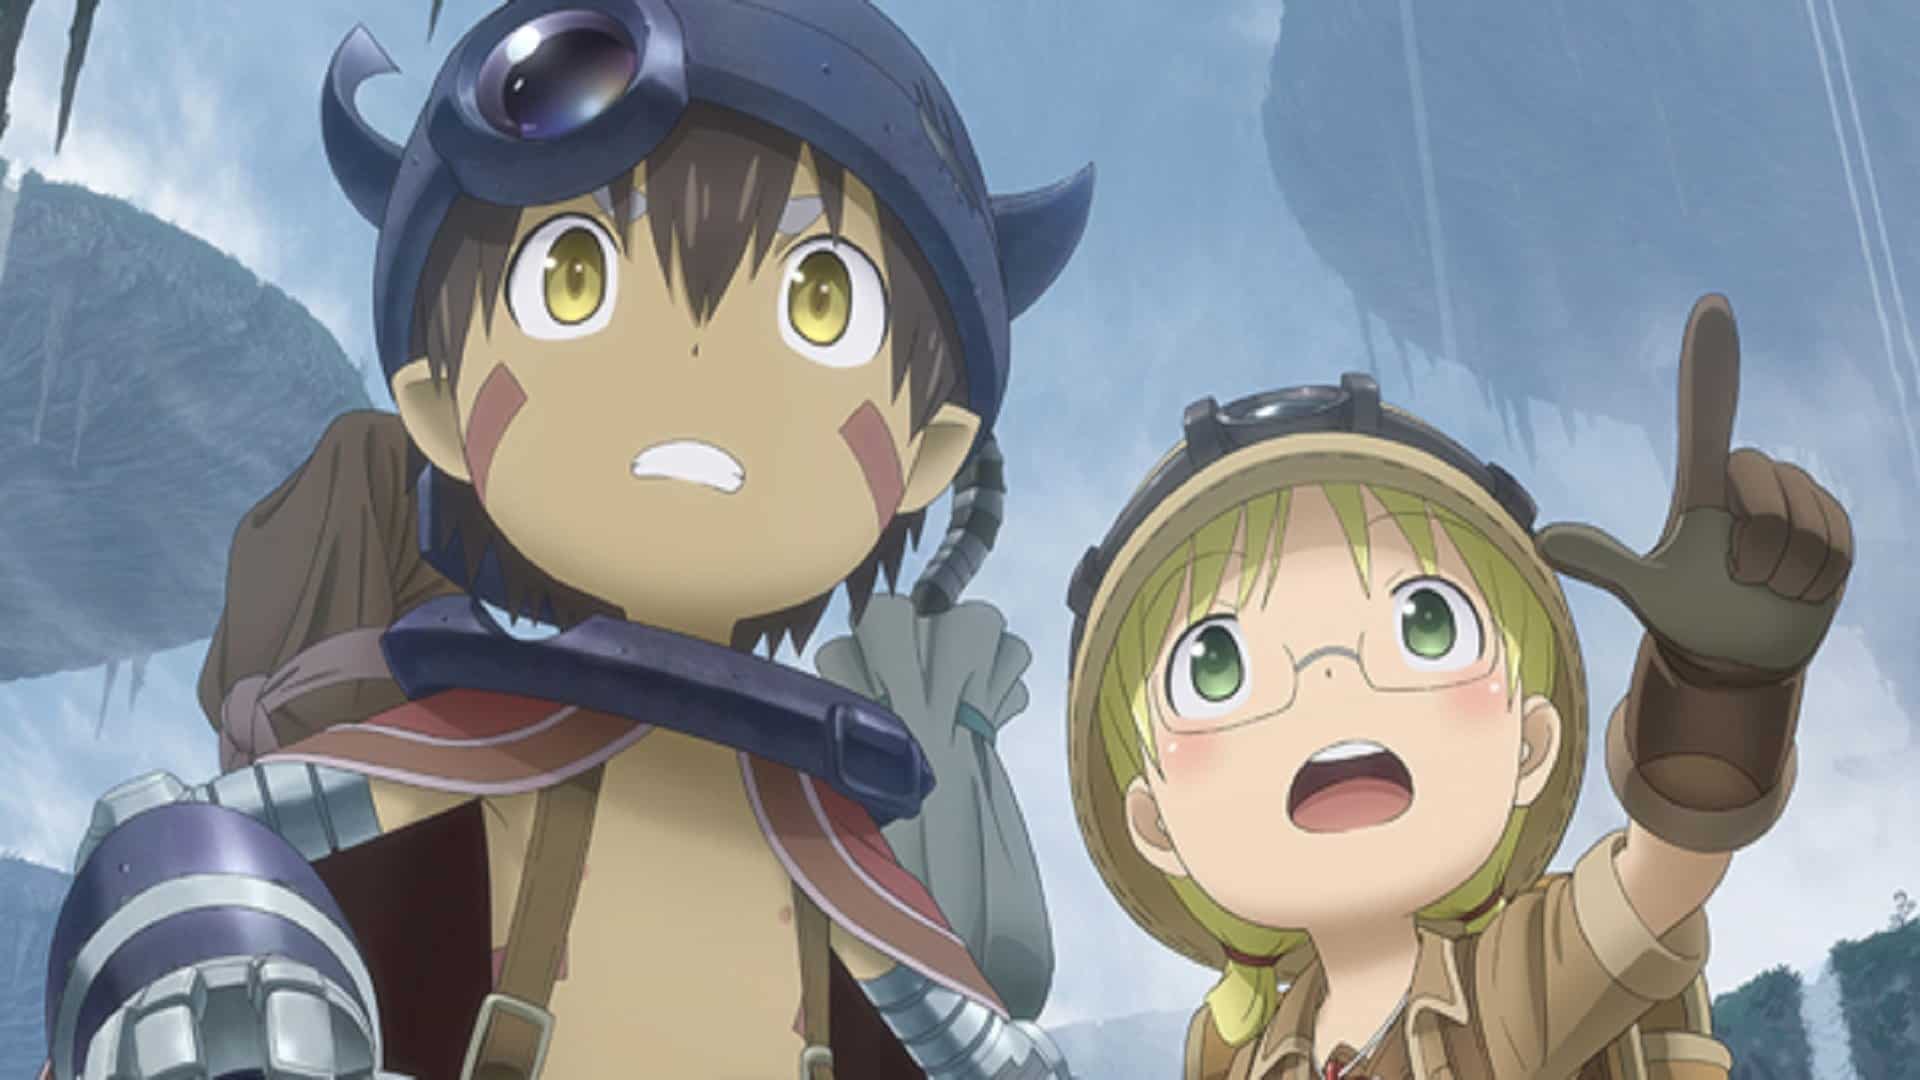 Made in Abyss What We Expect From The LiveAction Movie